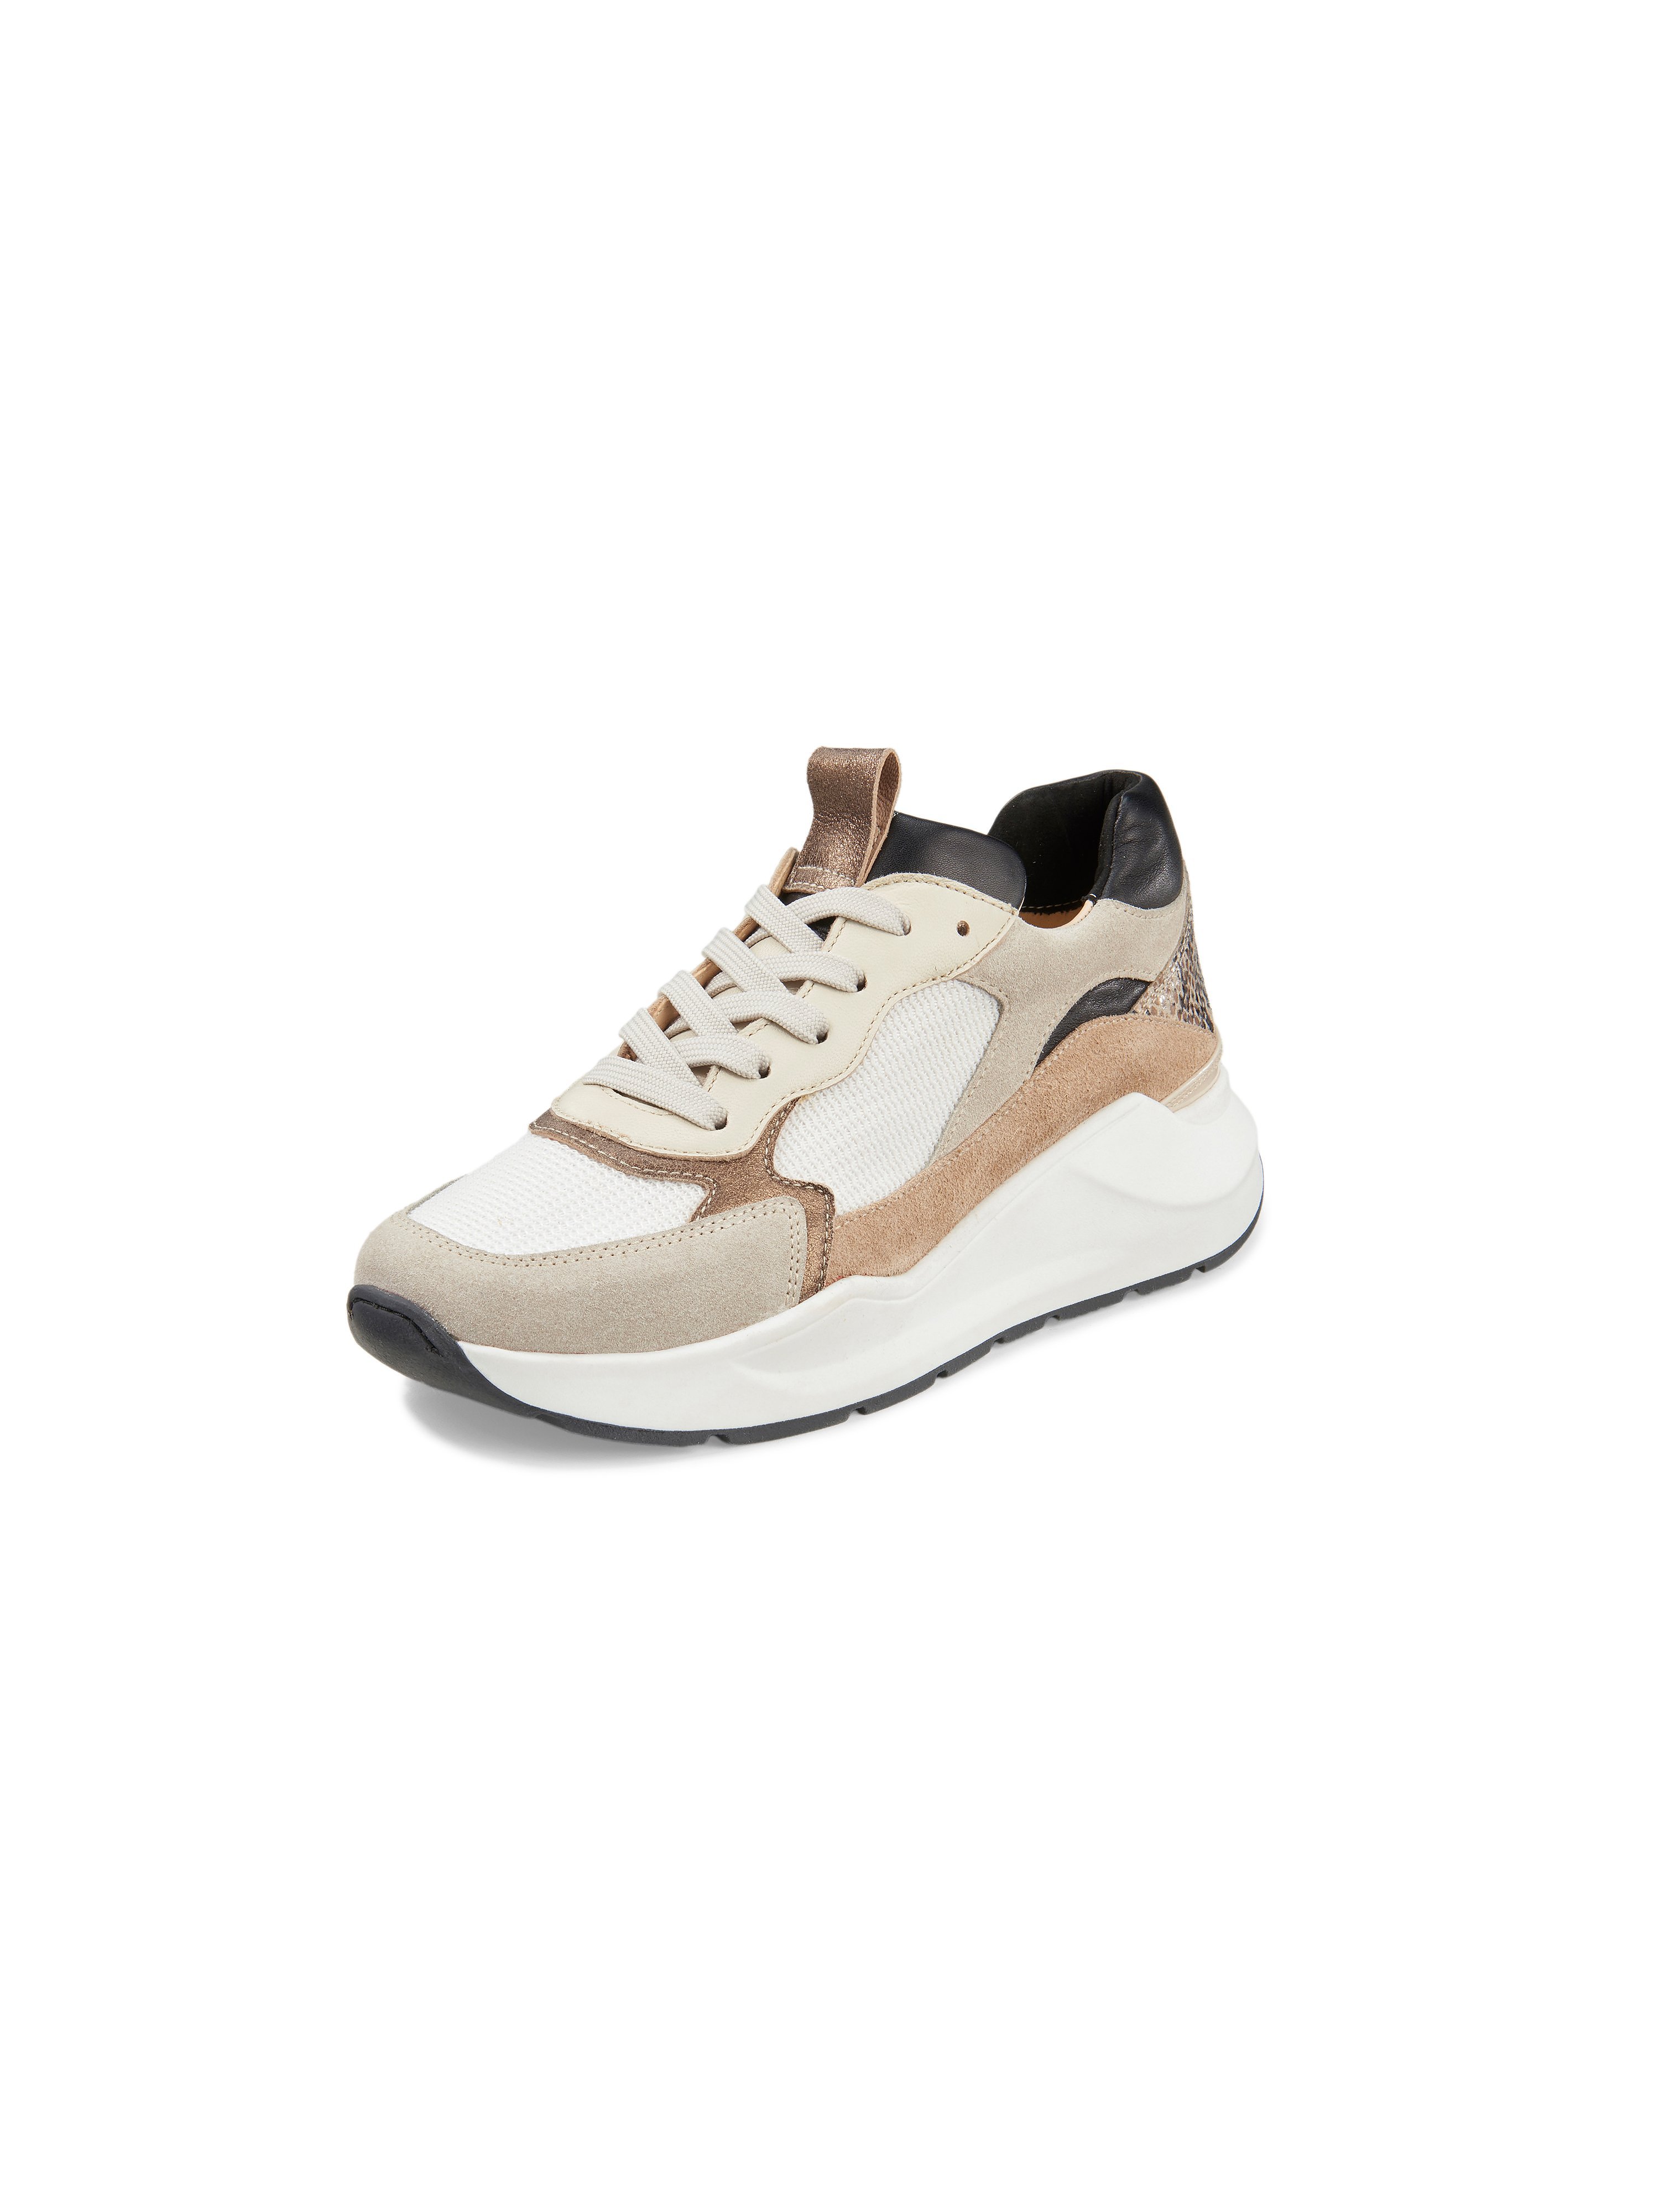 Les sneakers à plateforme cuir nappa  Softwaves beige taille 39,5